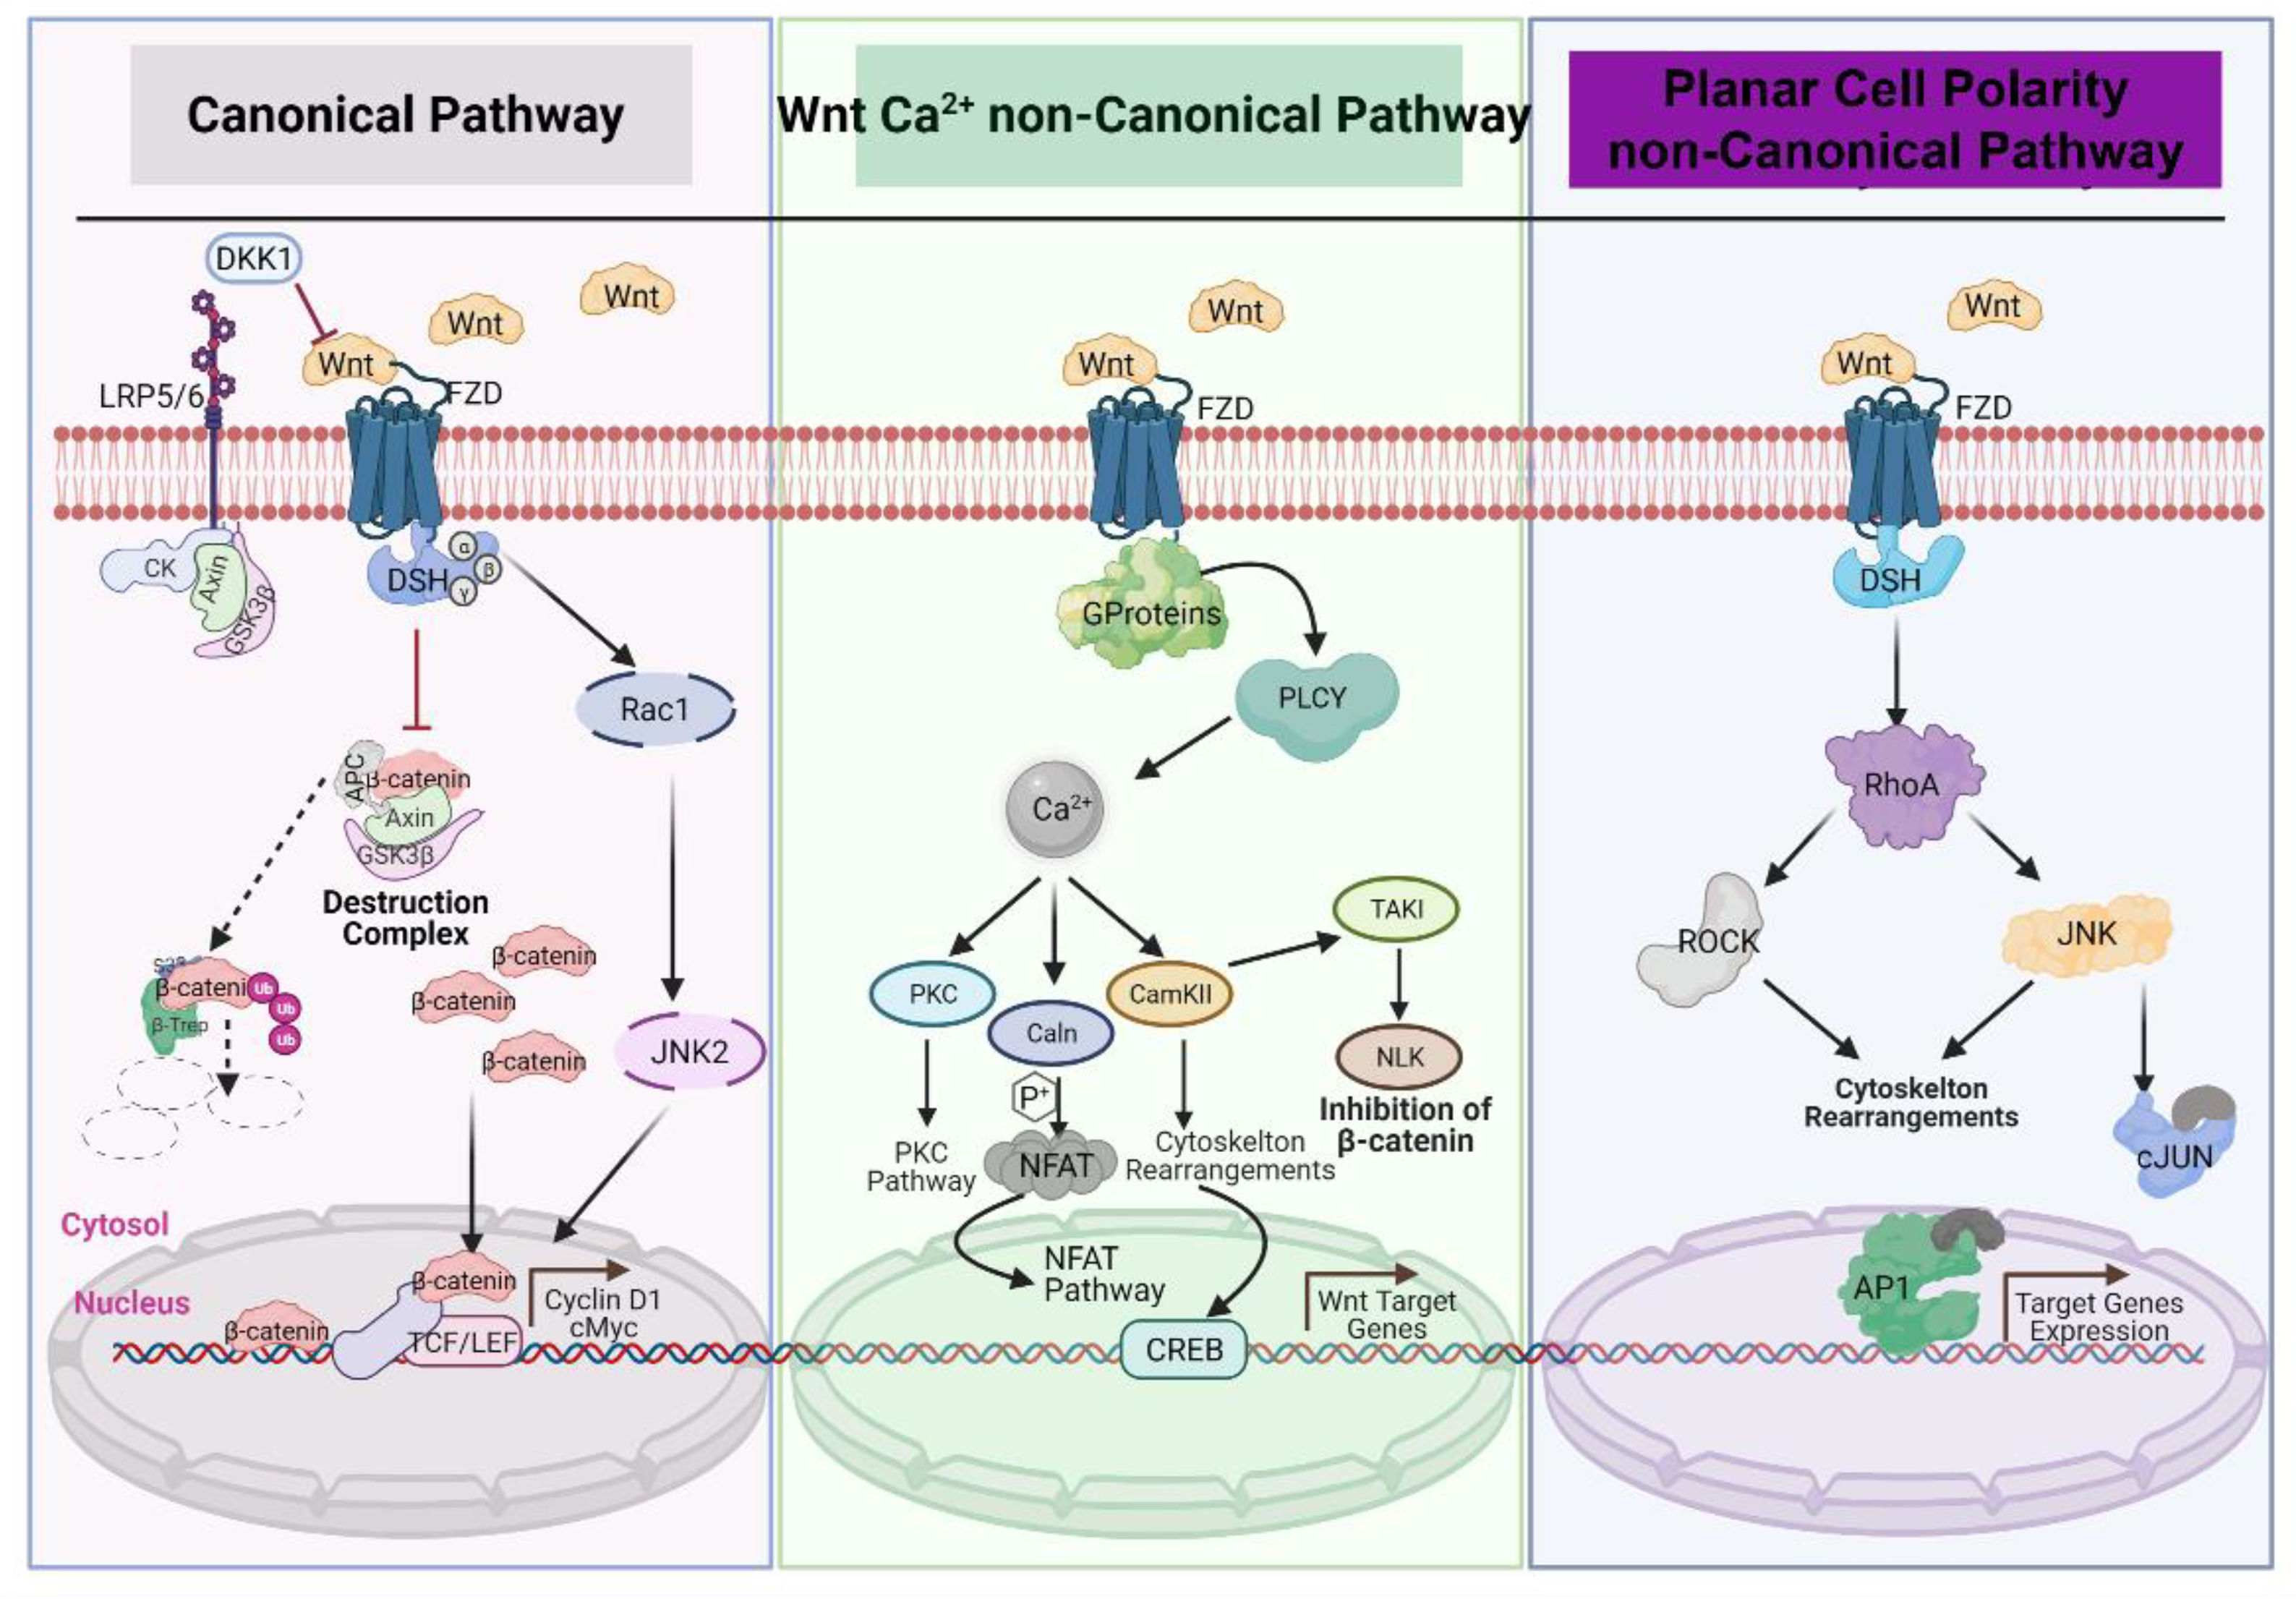 Cancers | Free Full-Text | Targeting Wnt Signaling in Endometrial Cancer